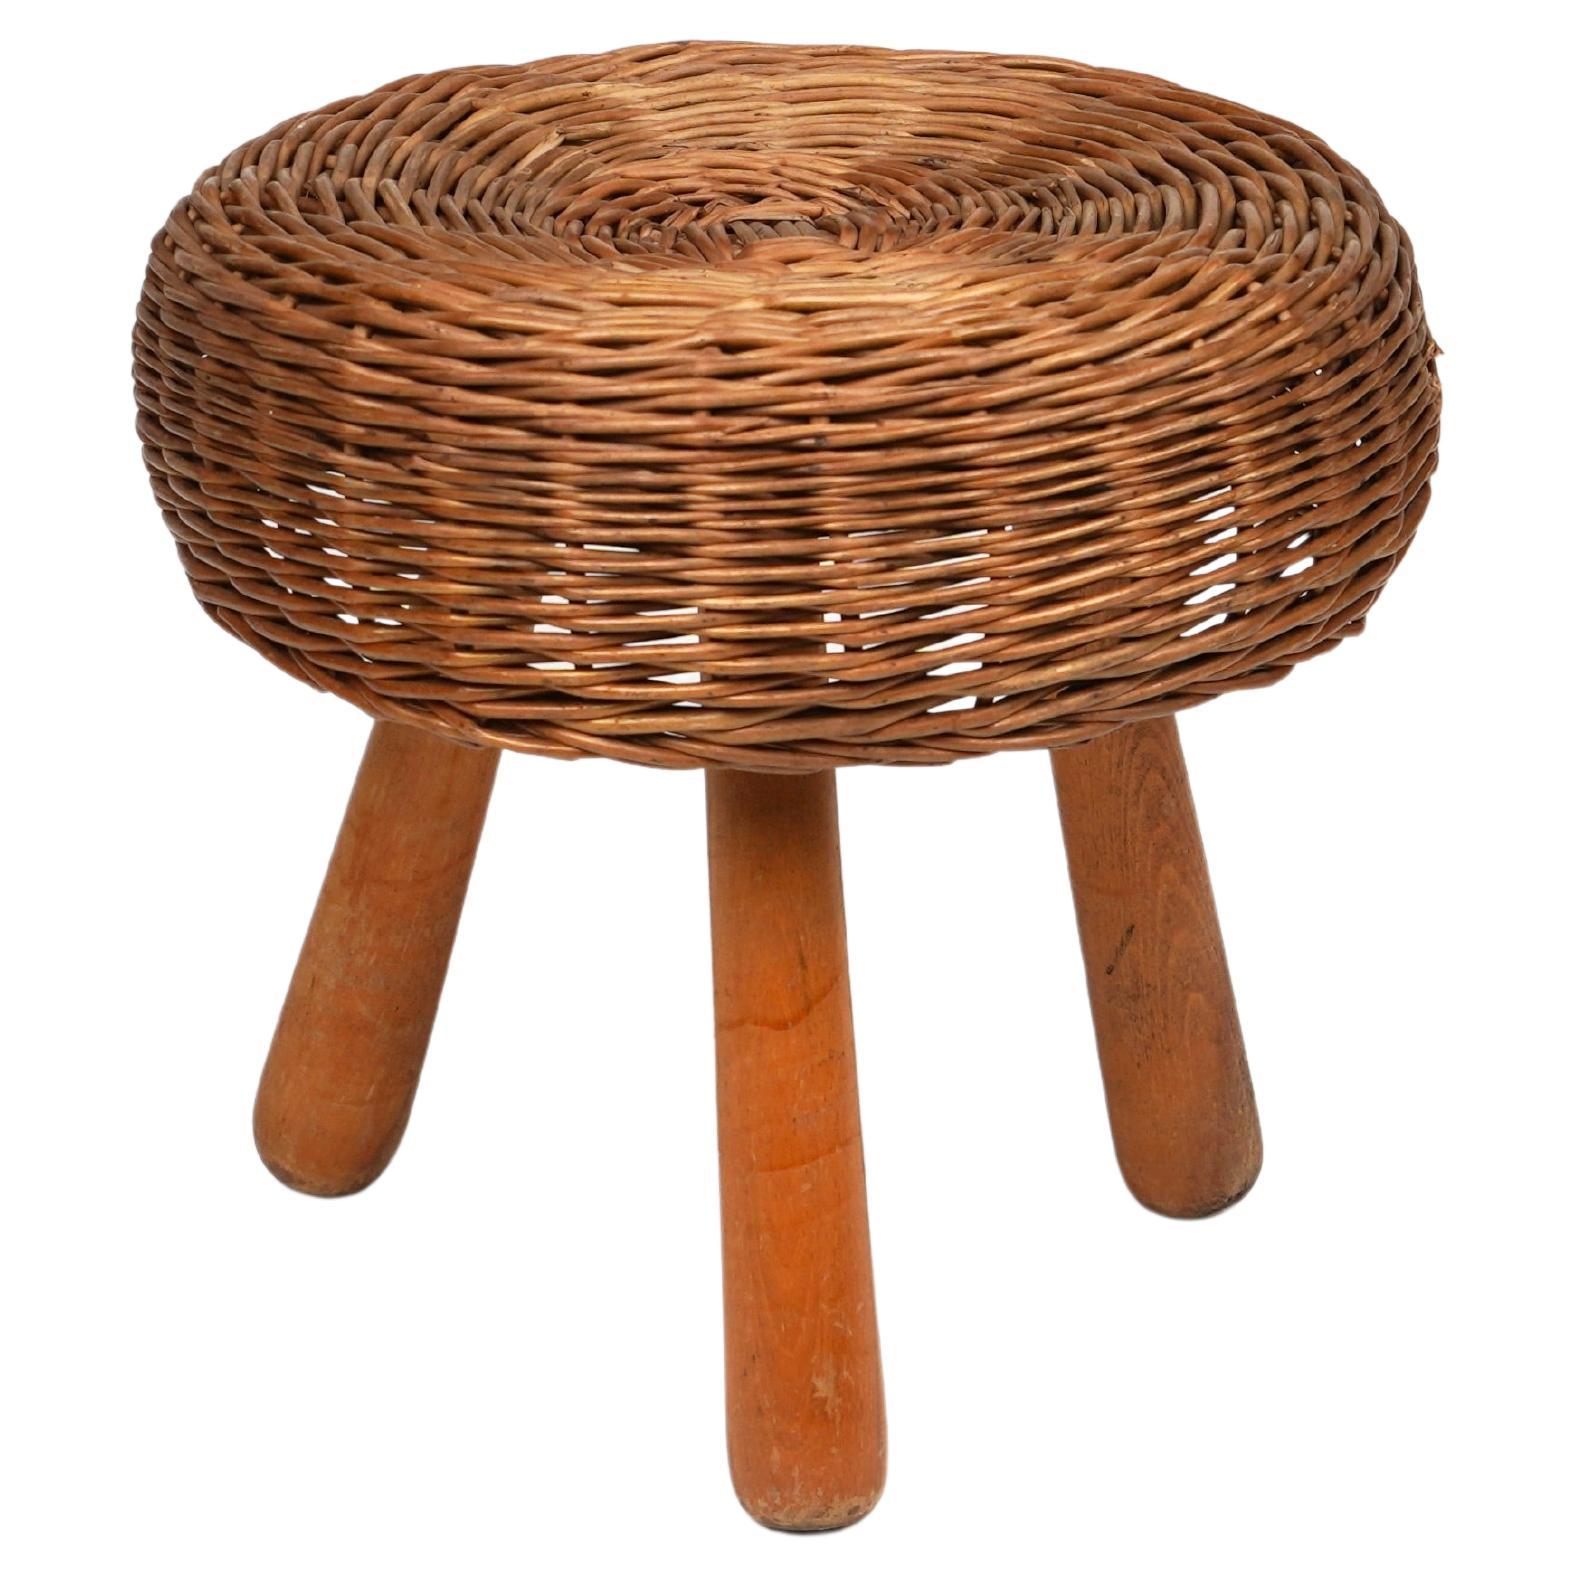 Midcentury Wicker and Wood Tripod Stool by Tony Paul, United States, 1950s For Sale 4